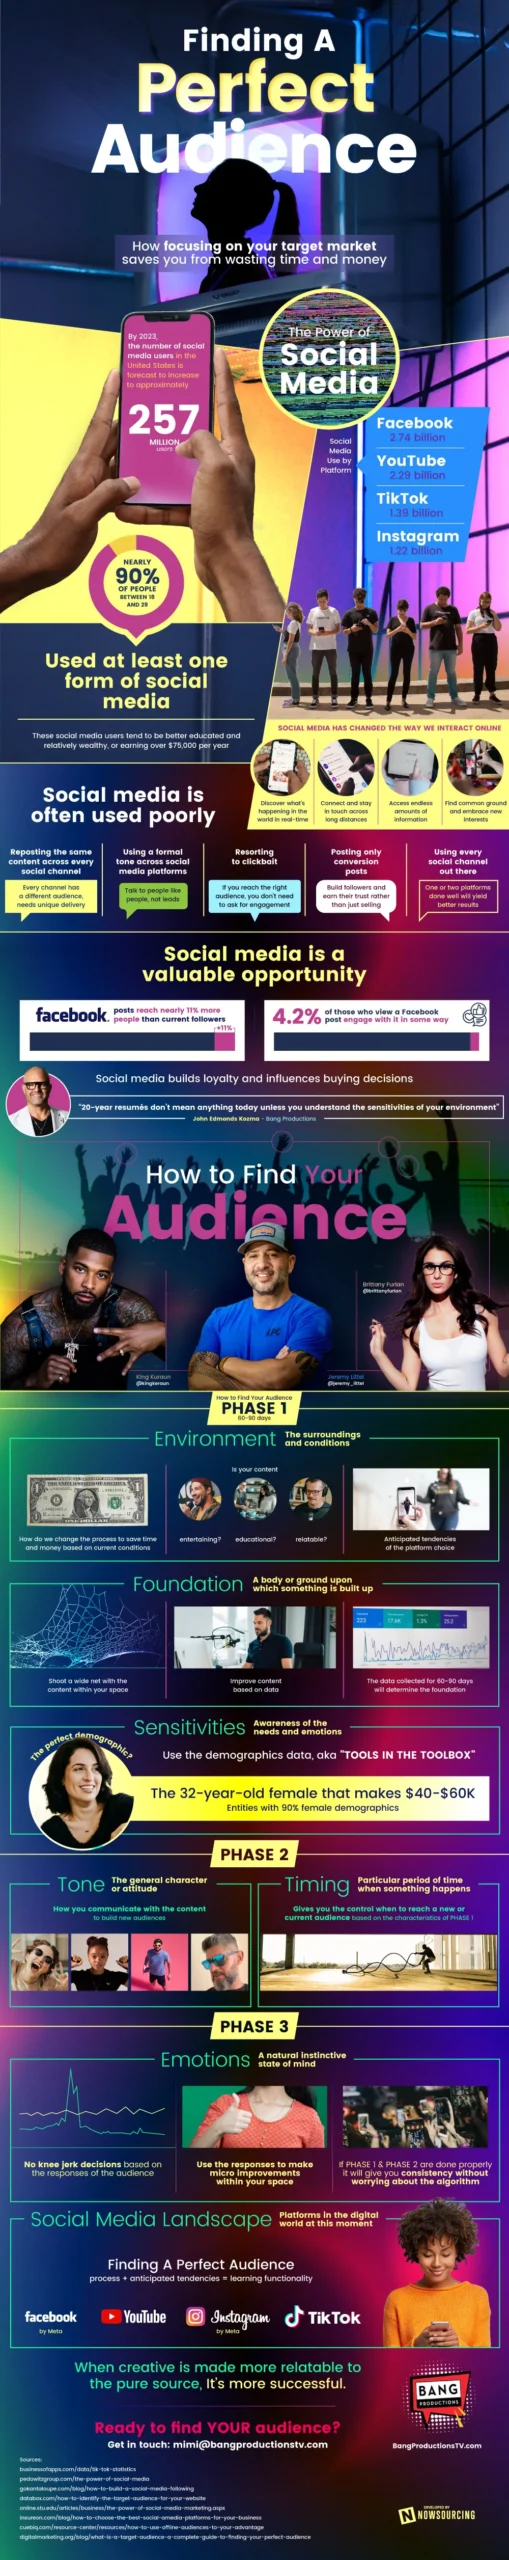 finding a perfect audience 33ad136a bb1a 4e9e b1d1 aaab682b0180 scaled Finding a Perfect Audience - SiteProNews